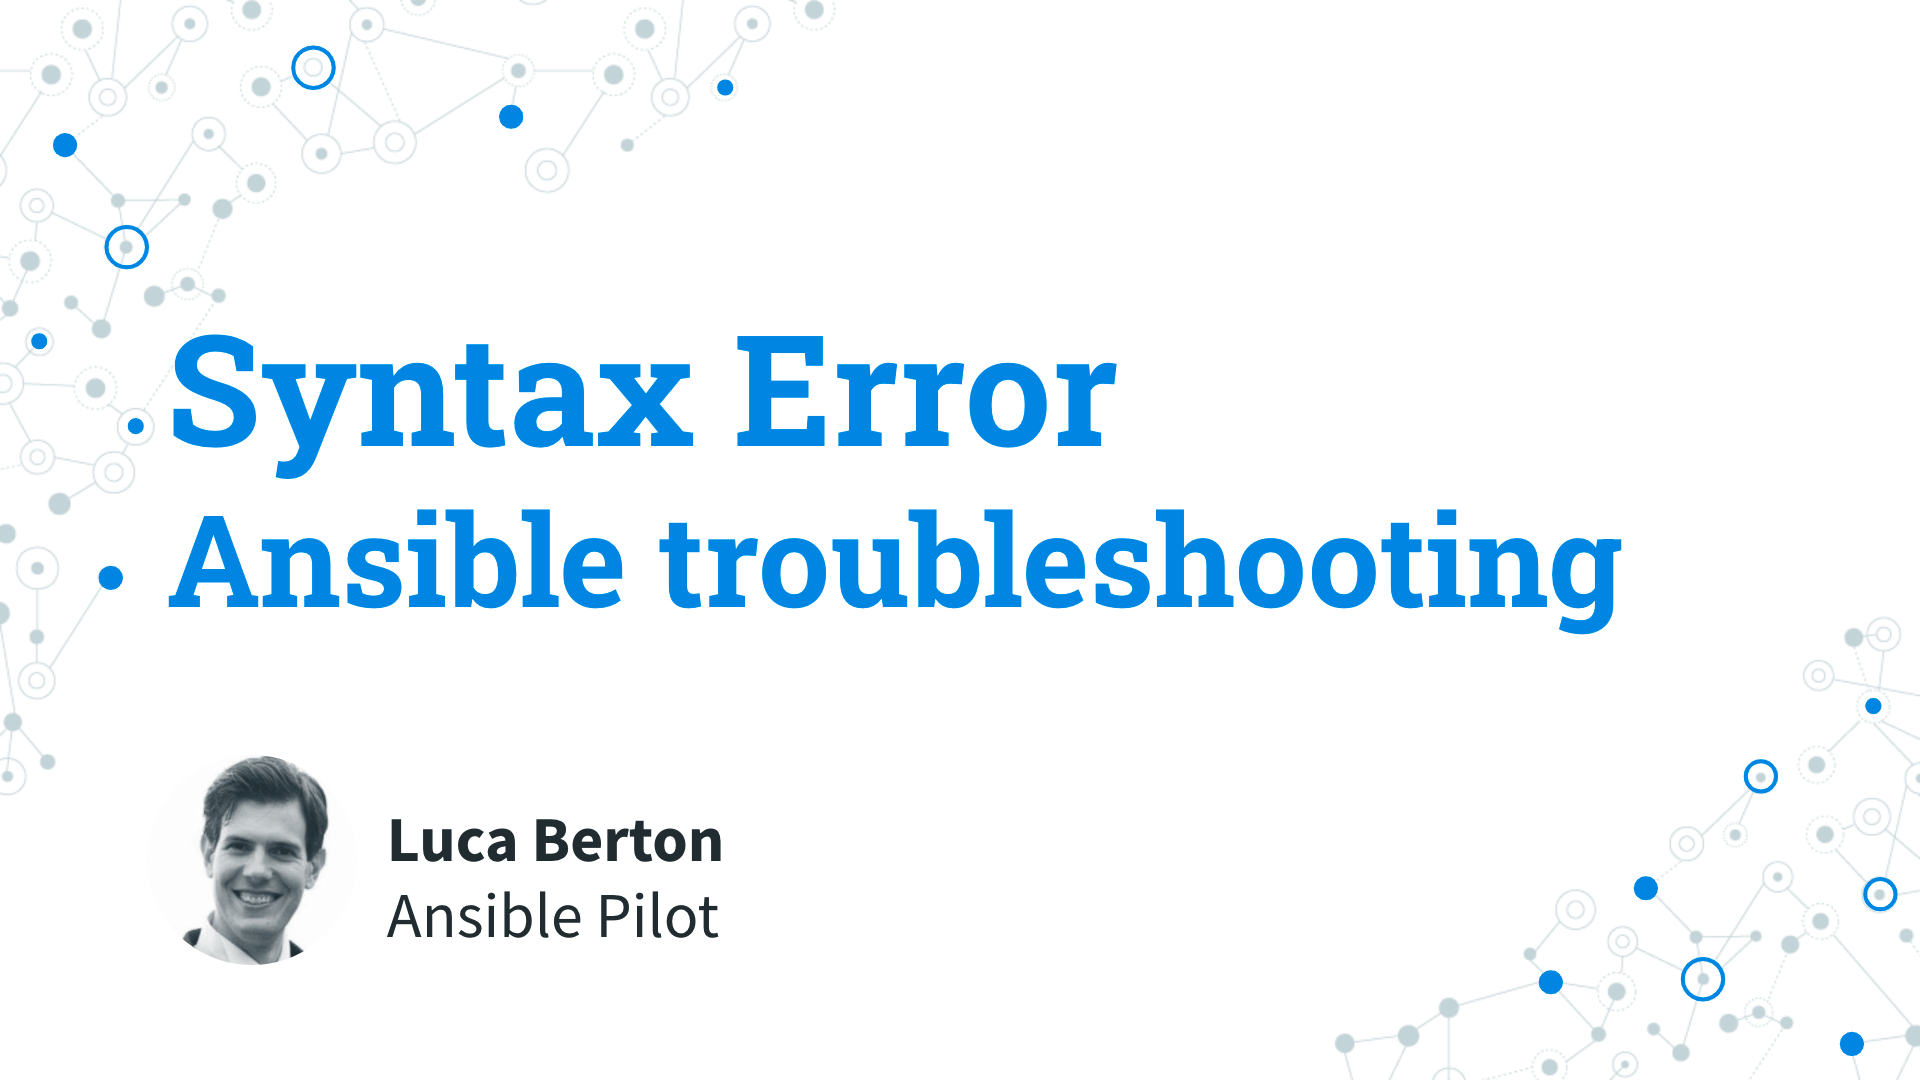 Ansible troubleshooting - Syntax Error